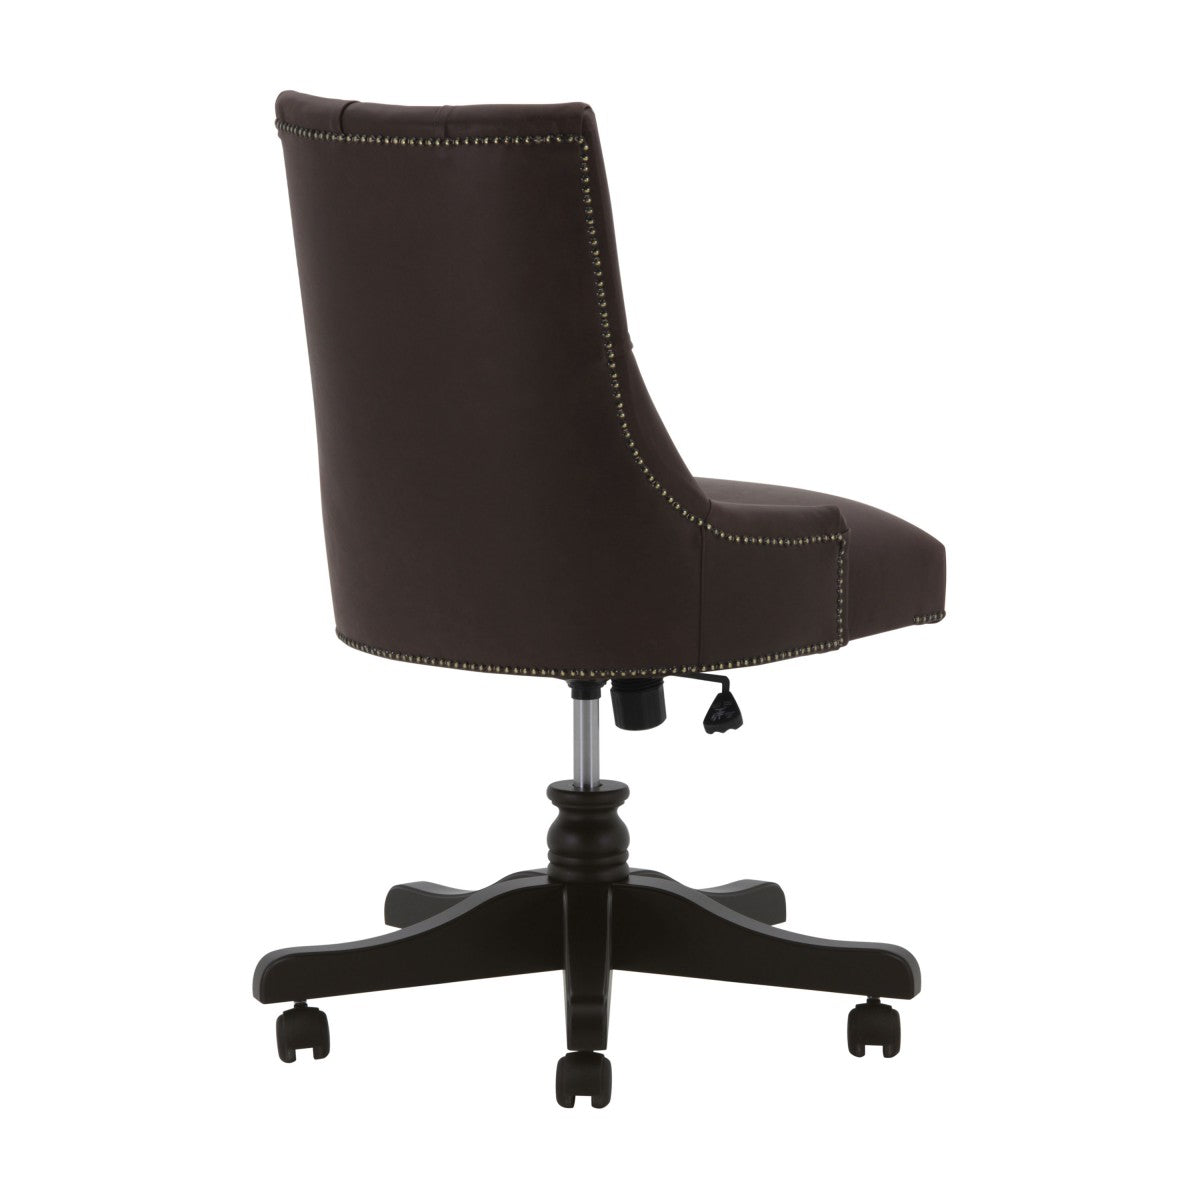 Edward Low Arm Bespoke Upholstered Luxury Executive Swivel Office Desk Chair MS810S Custom Made To Order